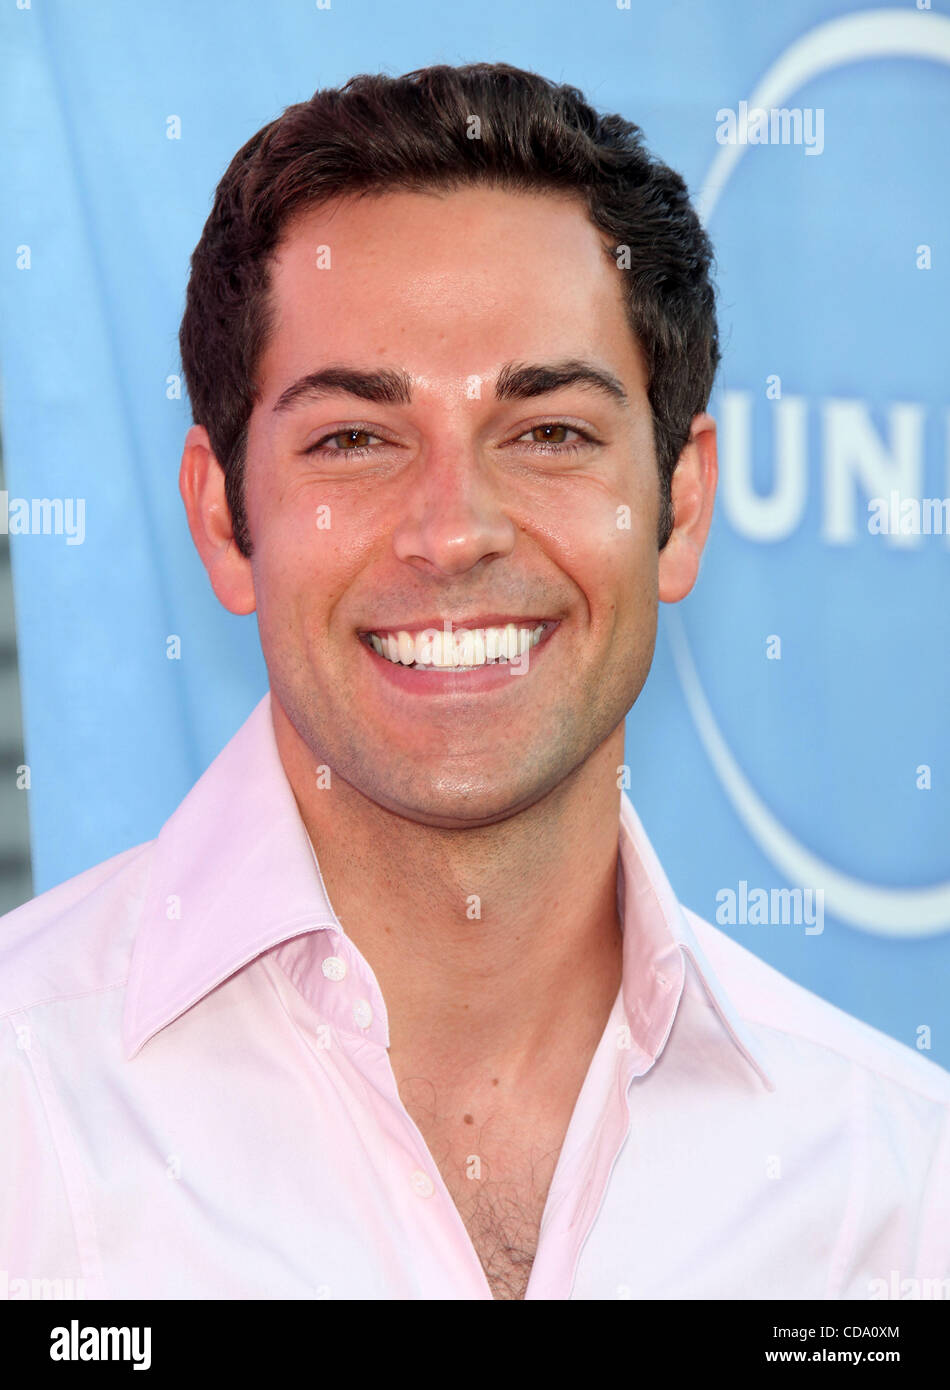 Jul 30, 2010 - Beverly Hills, California, U.S. - ZACHARY LEVI during the  NBC Universal event as part of the TCA Summer Press Tour held at the  Beverly Hilton. (Credit Image: ©